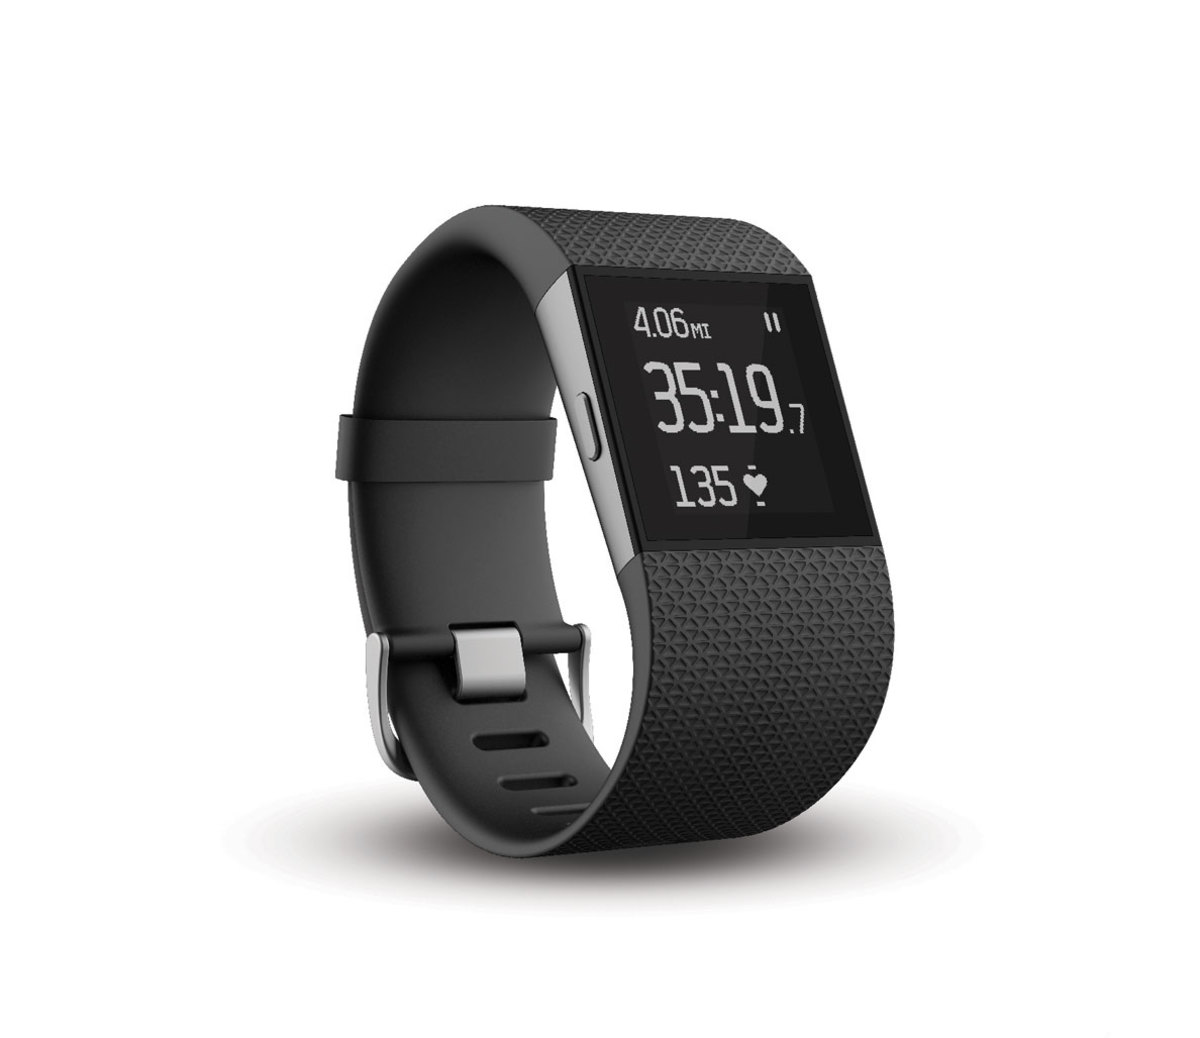 Fitbit Surge Gets Tricked Out With New Software - Men's Journal